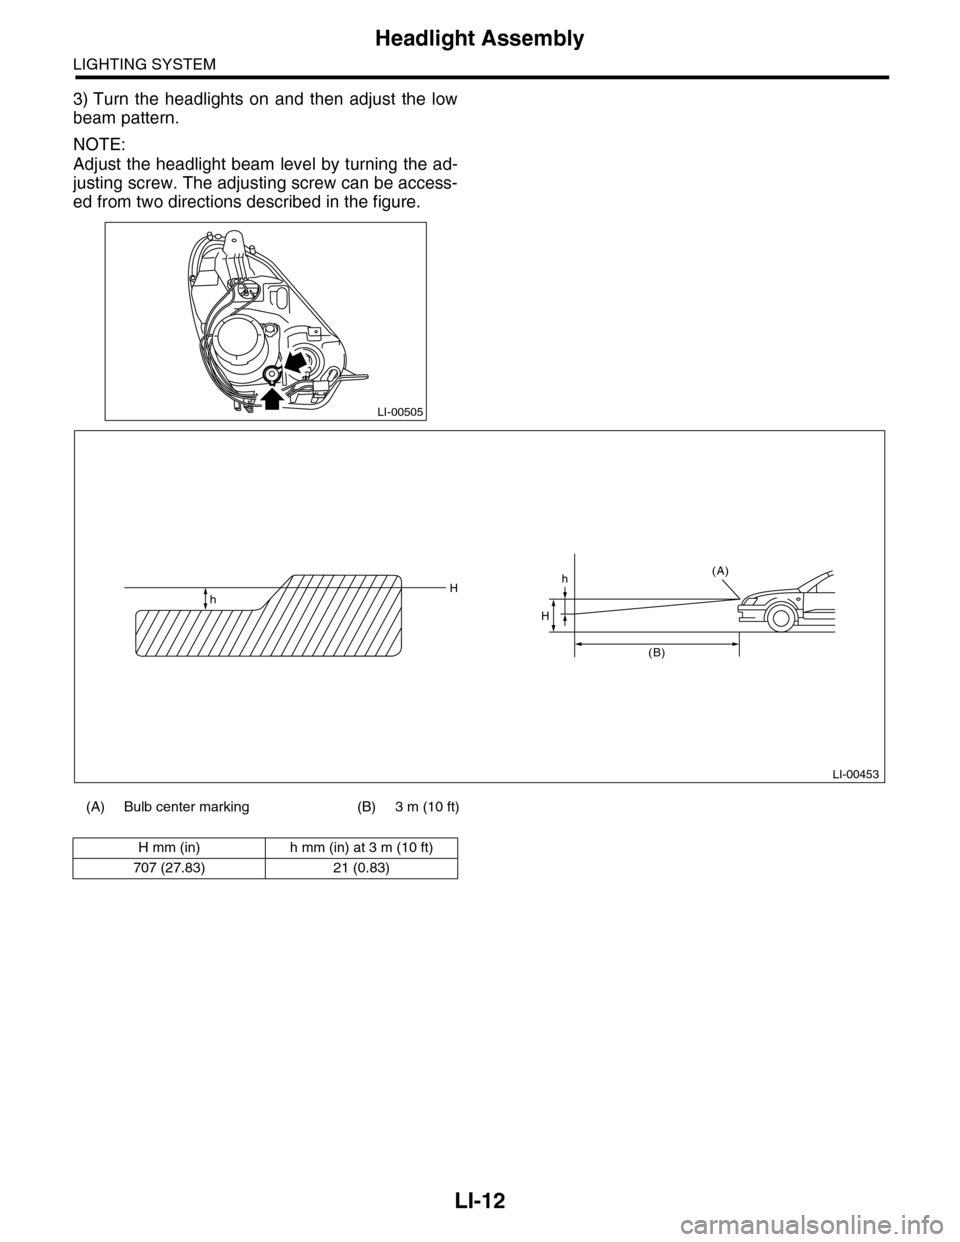 SUBARU TRIBECA 2009 1.G Service Workshop Manual LI-12
Headlight Assembly
LIGHTING SYSTEM
3) Turn  the  headlights  on  and  then  adjust  the  low
beam pattern.
NOTE:
Adjust the headlight beam level by turning the ad-
justing screw. The adjusting s